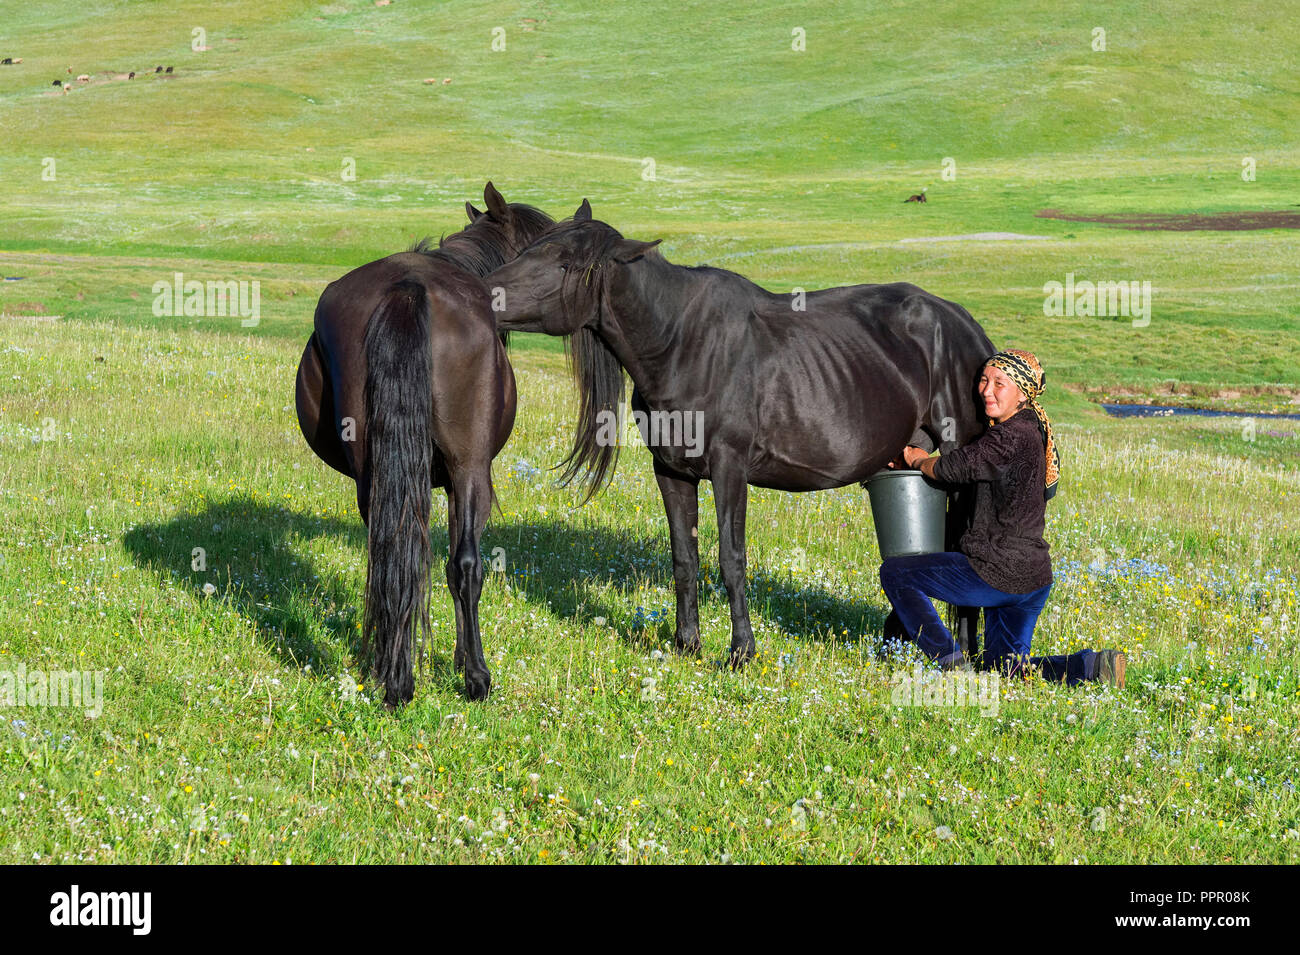 Kyrgyz woman milking a mare on mountain pastures, Song Kol Lake, Naryn province, Kyrgyzstan, Central Asia Stock Photo